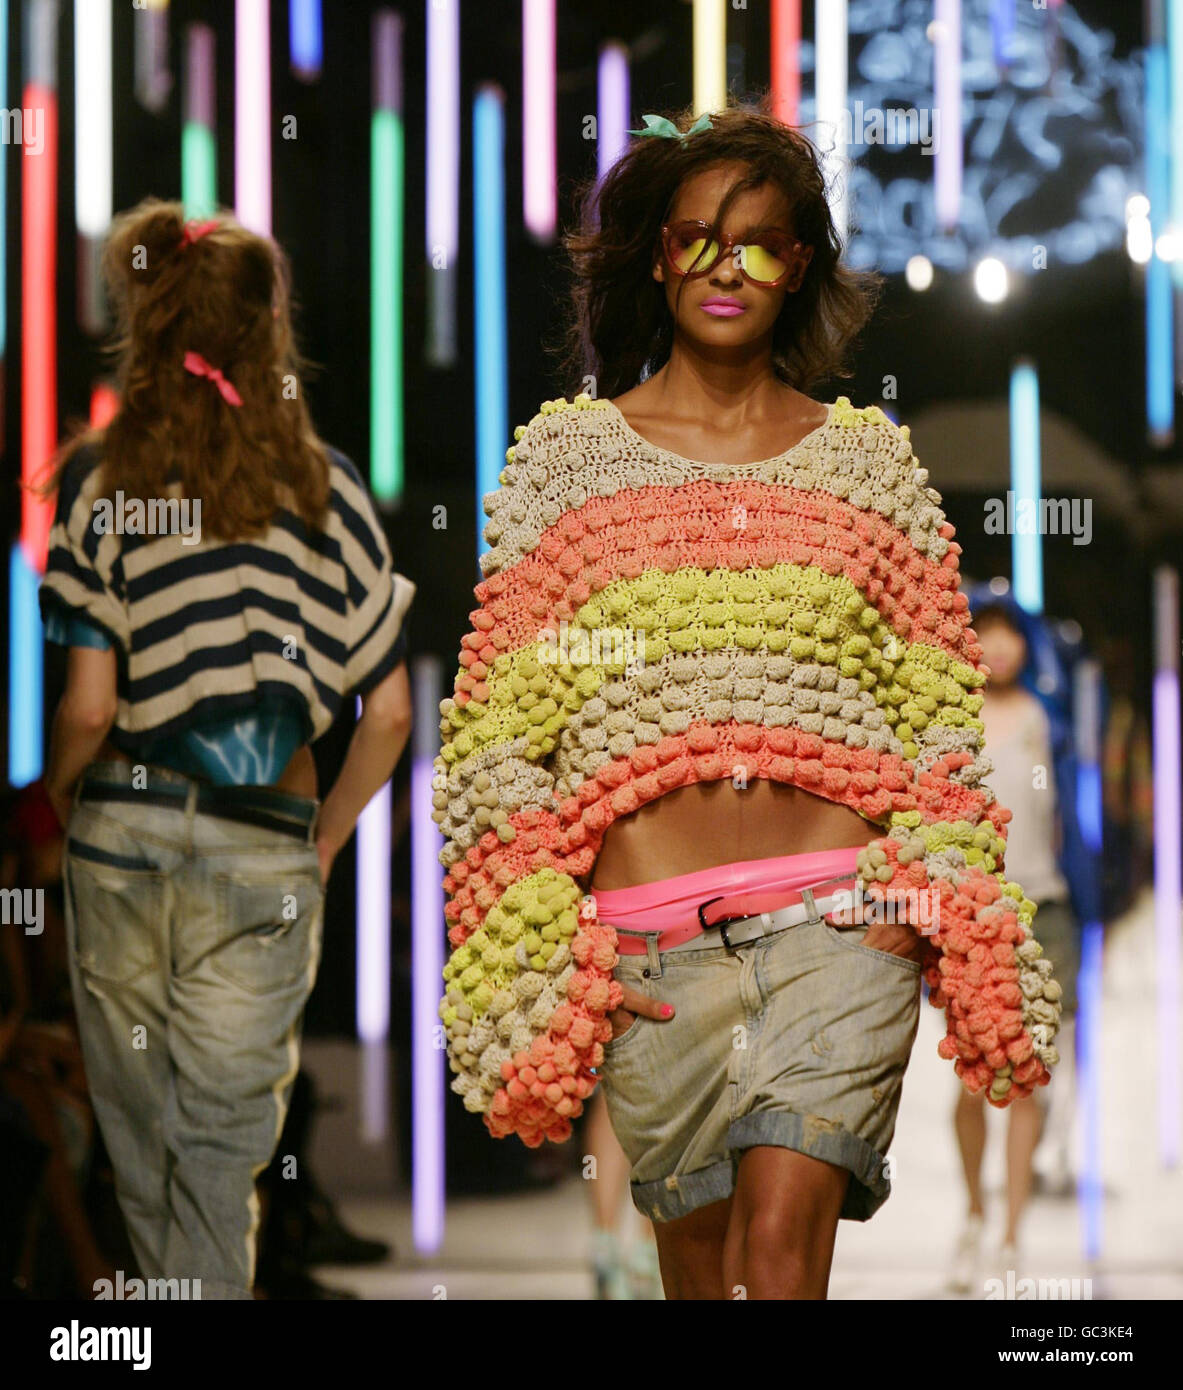 Models on the runway during the Topshop Unique Catwalk show held at the  Topshop Venue at the University of Westminster in central London during  London Fashion Week Stock Photo - Alamy